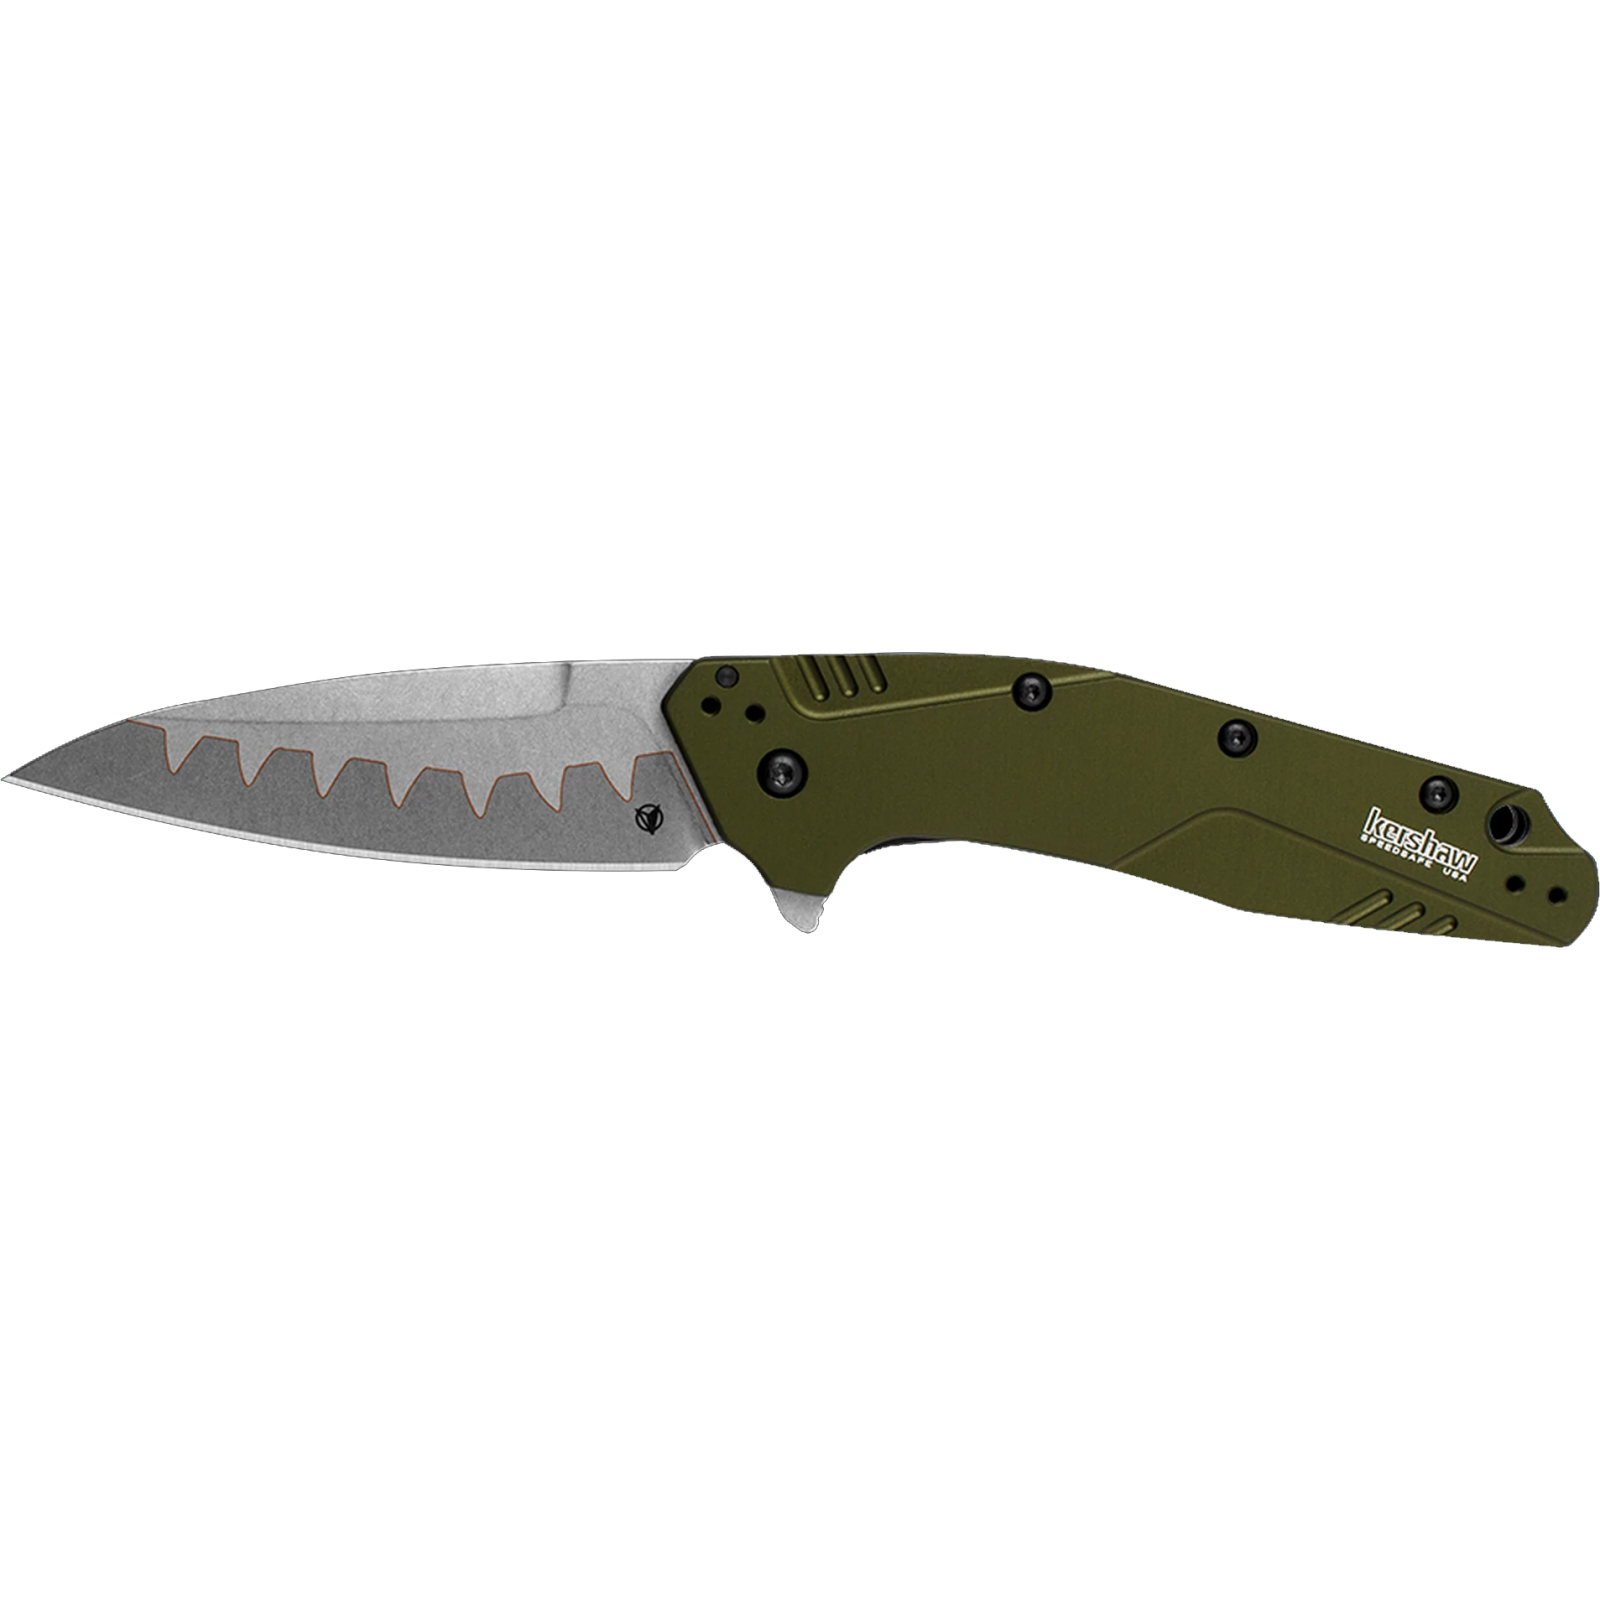 Нож Kershaw Dividend Composite Blade Olive (1812OLCB)